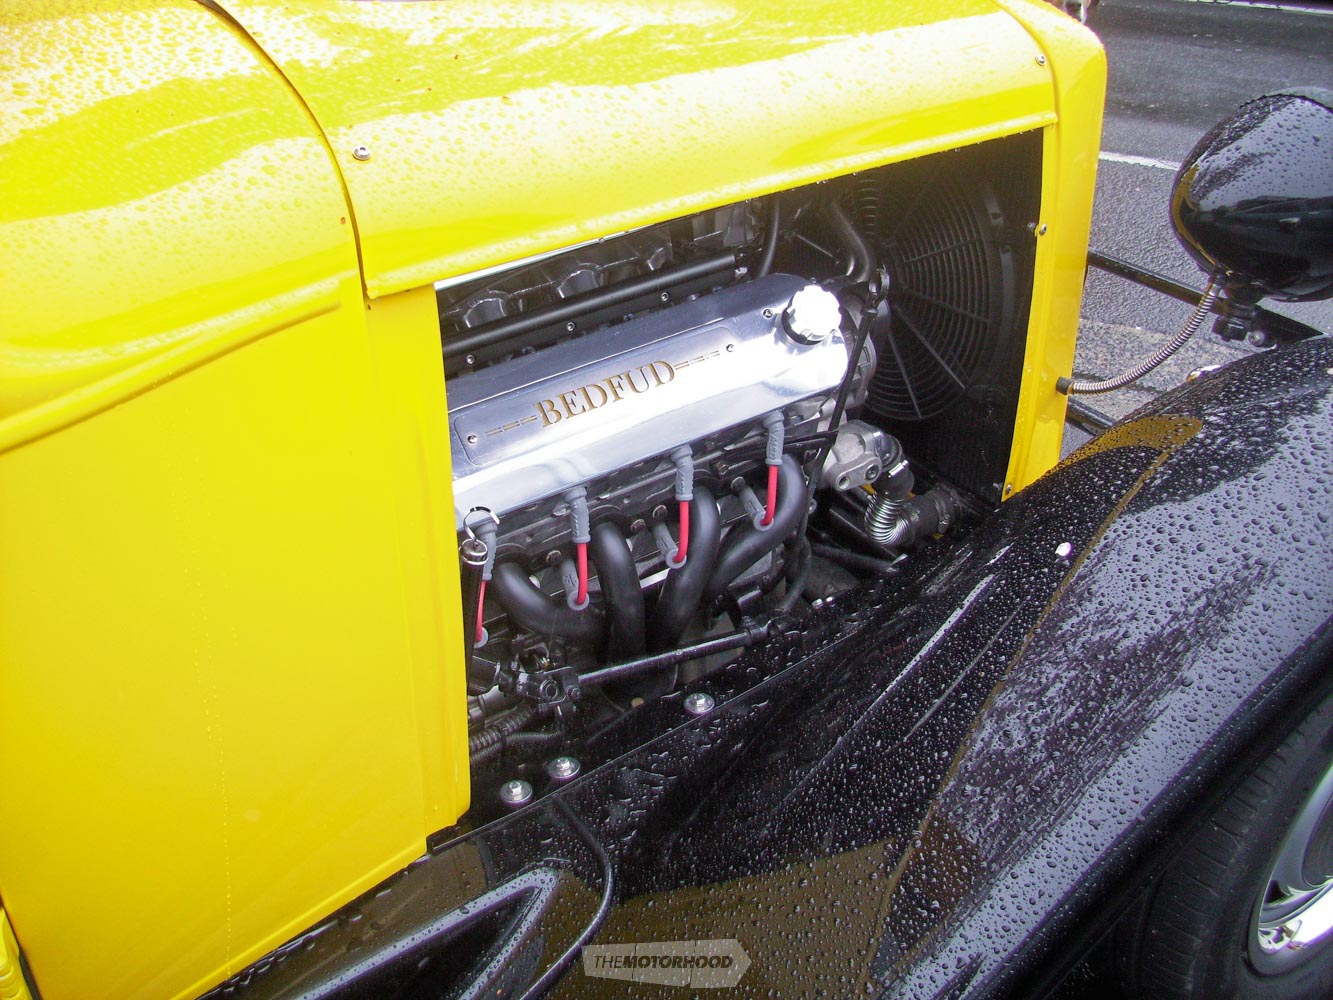 Loved the detailing on the valve covers to match the pickups name.jpg